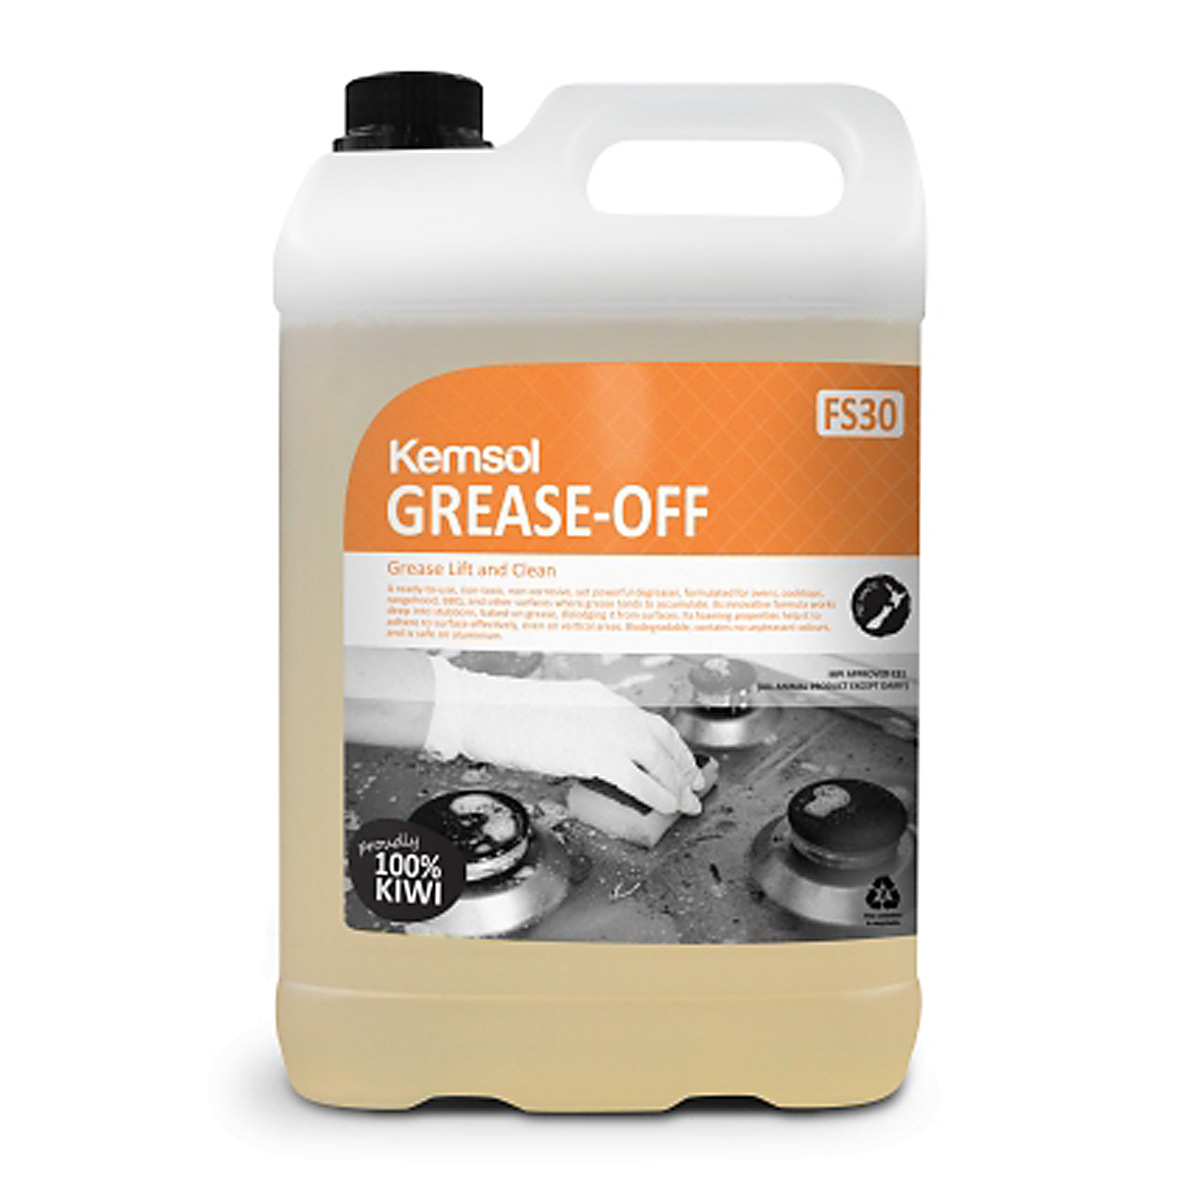 cleaning-products-degreasers-kemsol-grease-off-5L-litre-ready-to-use-non-toxic-non-corrosive-ovens-cooktops-rangehoods-bbq-vjs-distributors-hawkes-bay-nz-KGREASEOFF